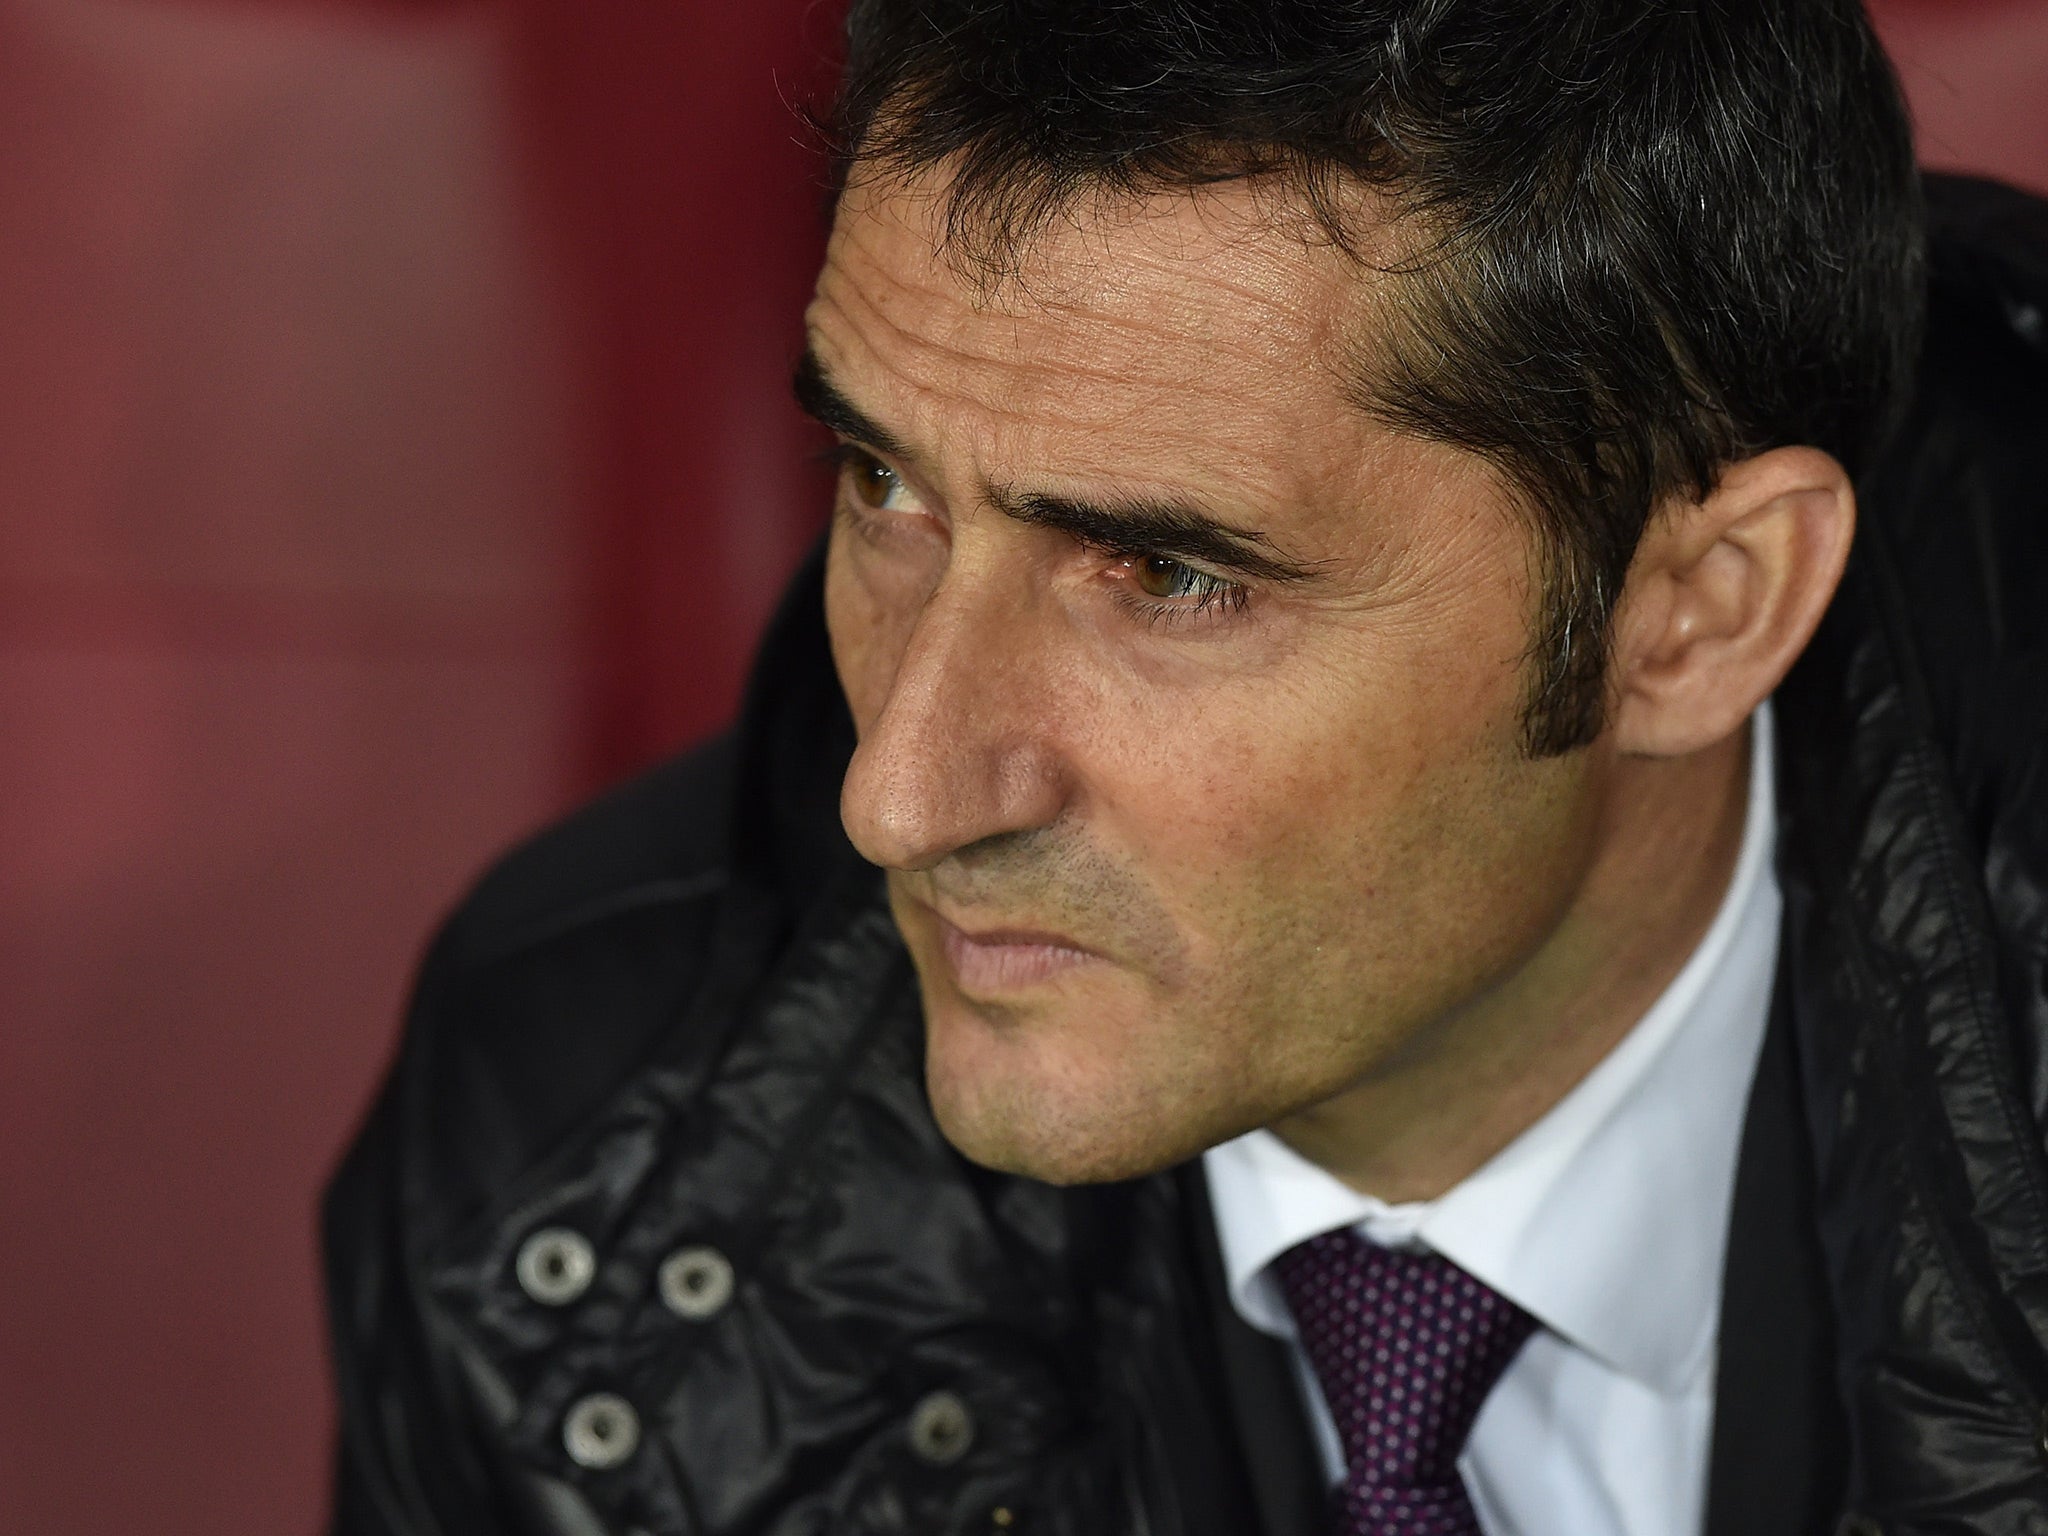 Ernesto Valverde is well-known in La Liga, but Barca will be a much bigger test